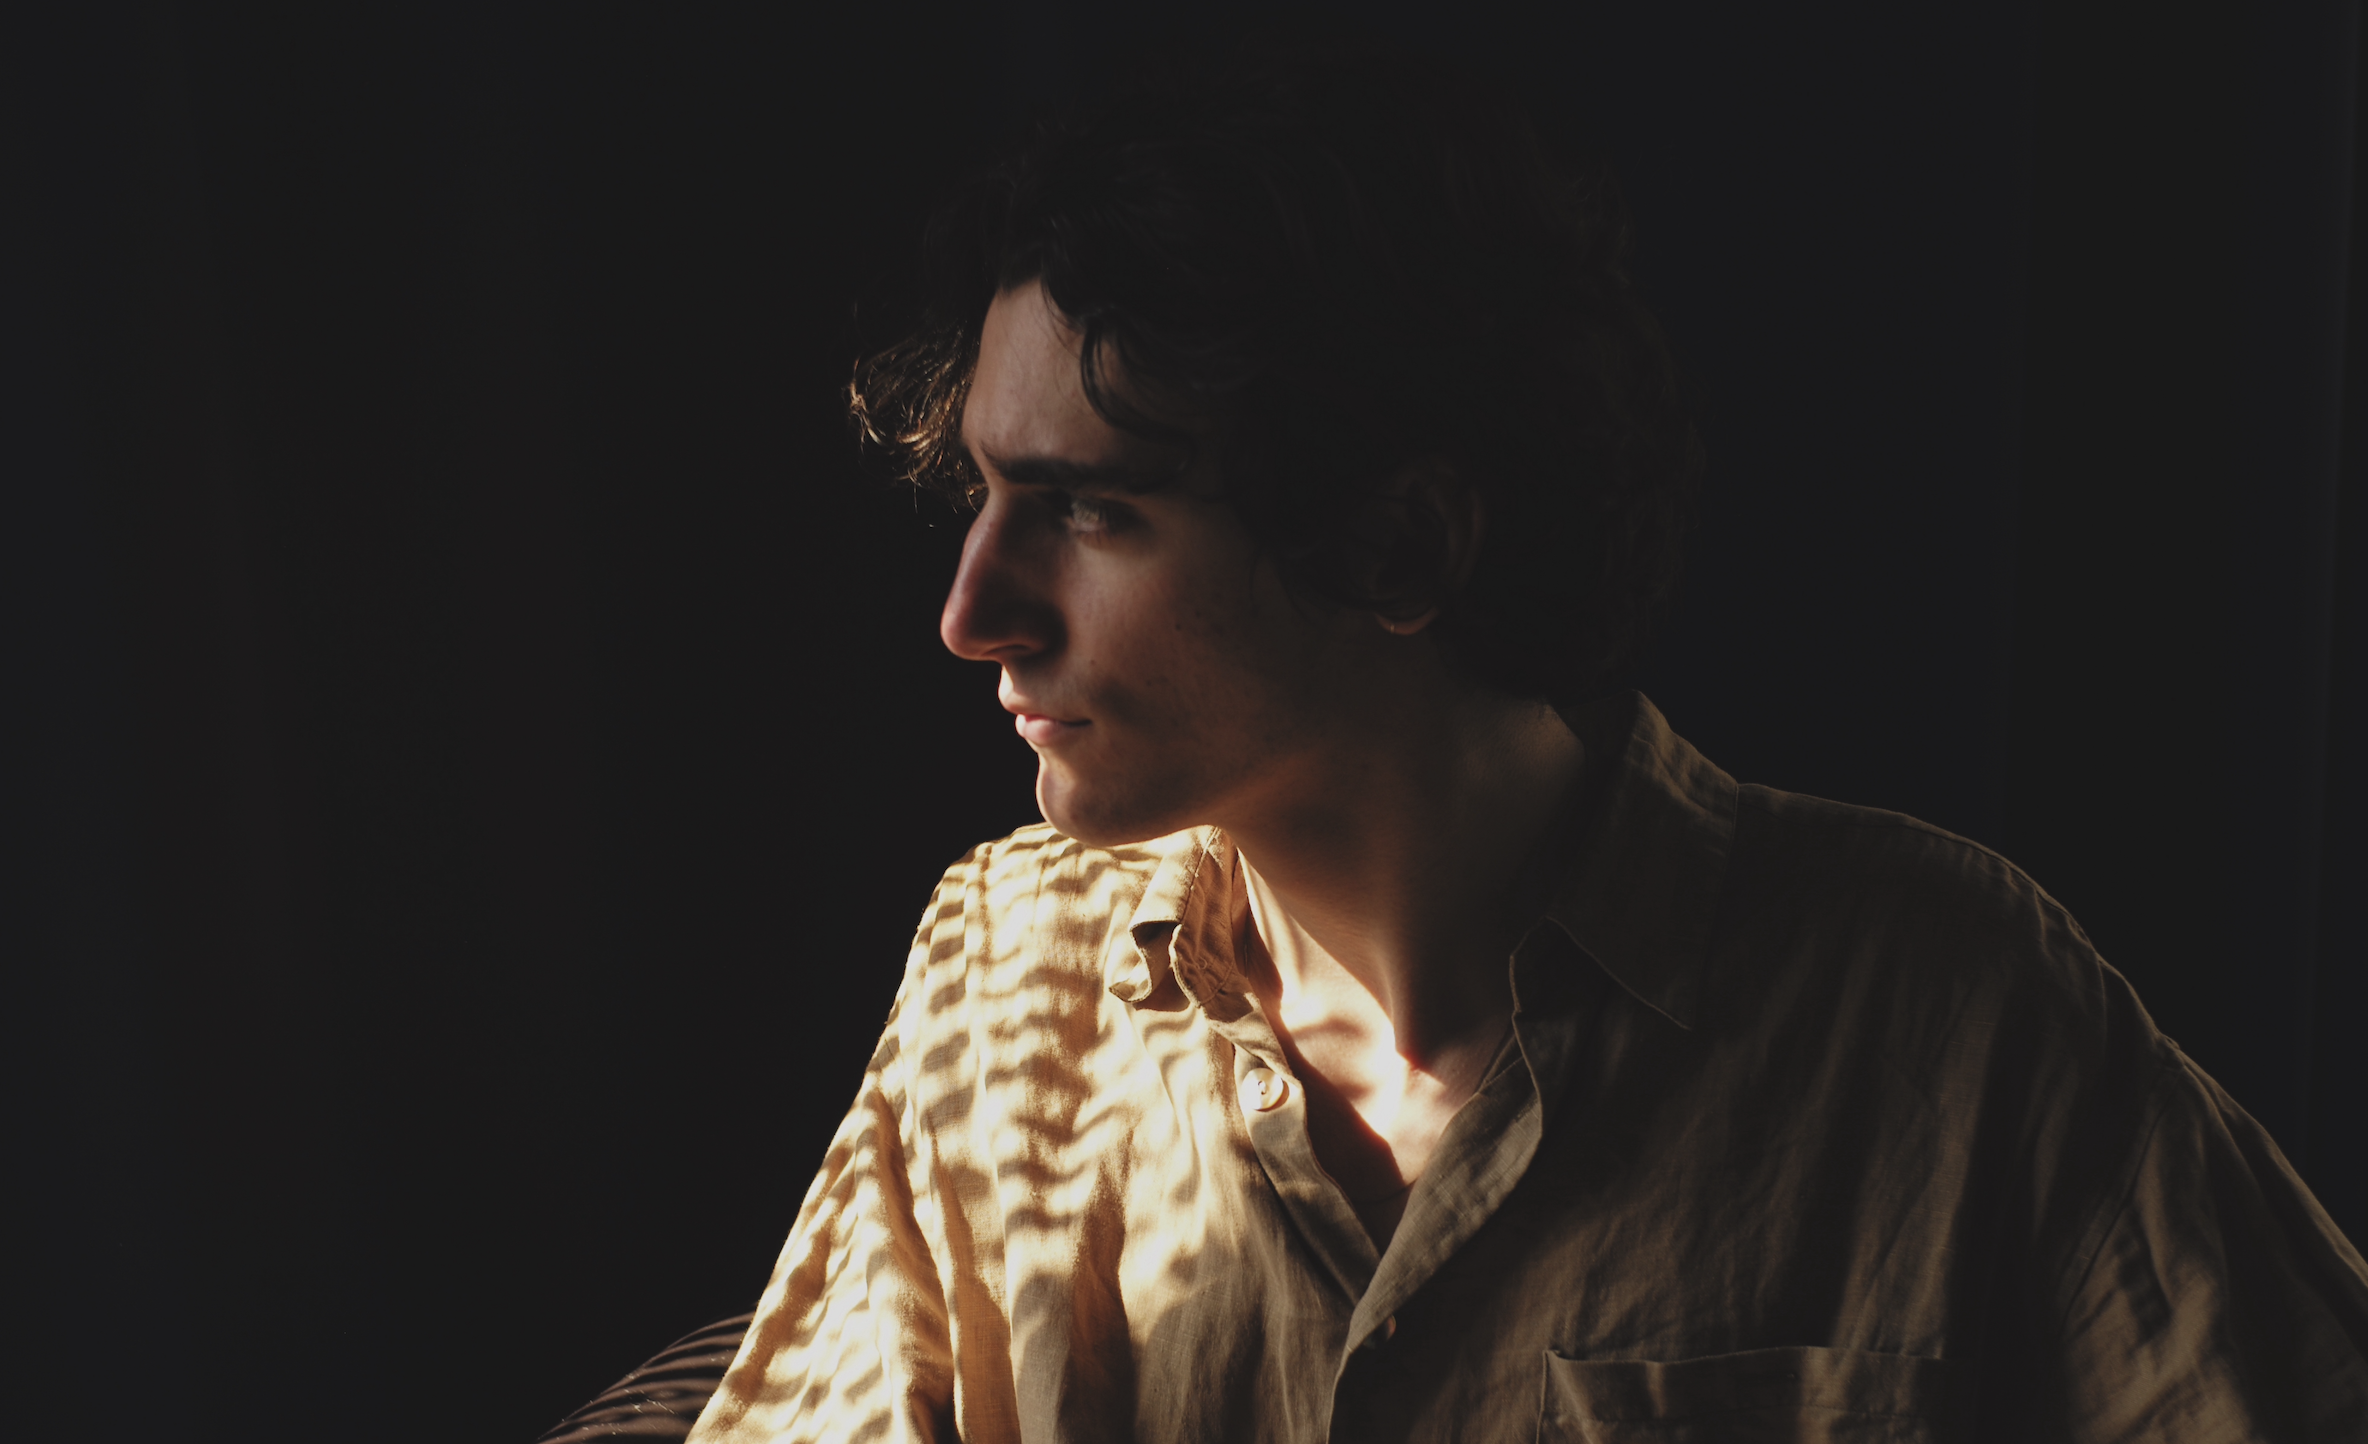 TAMINO – Track by Track